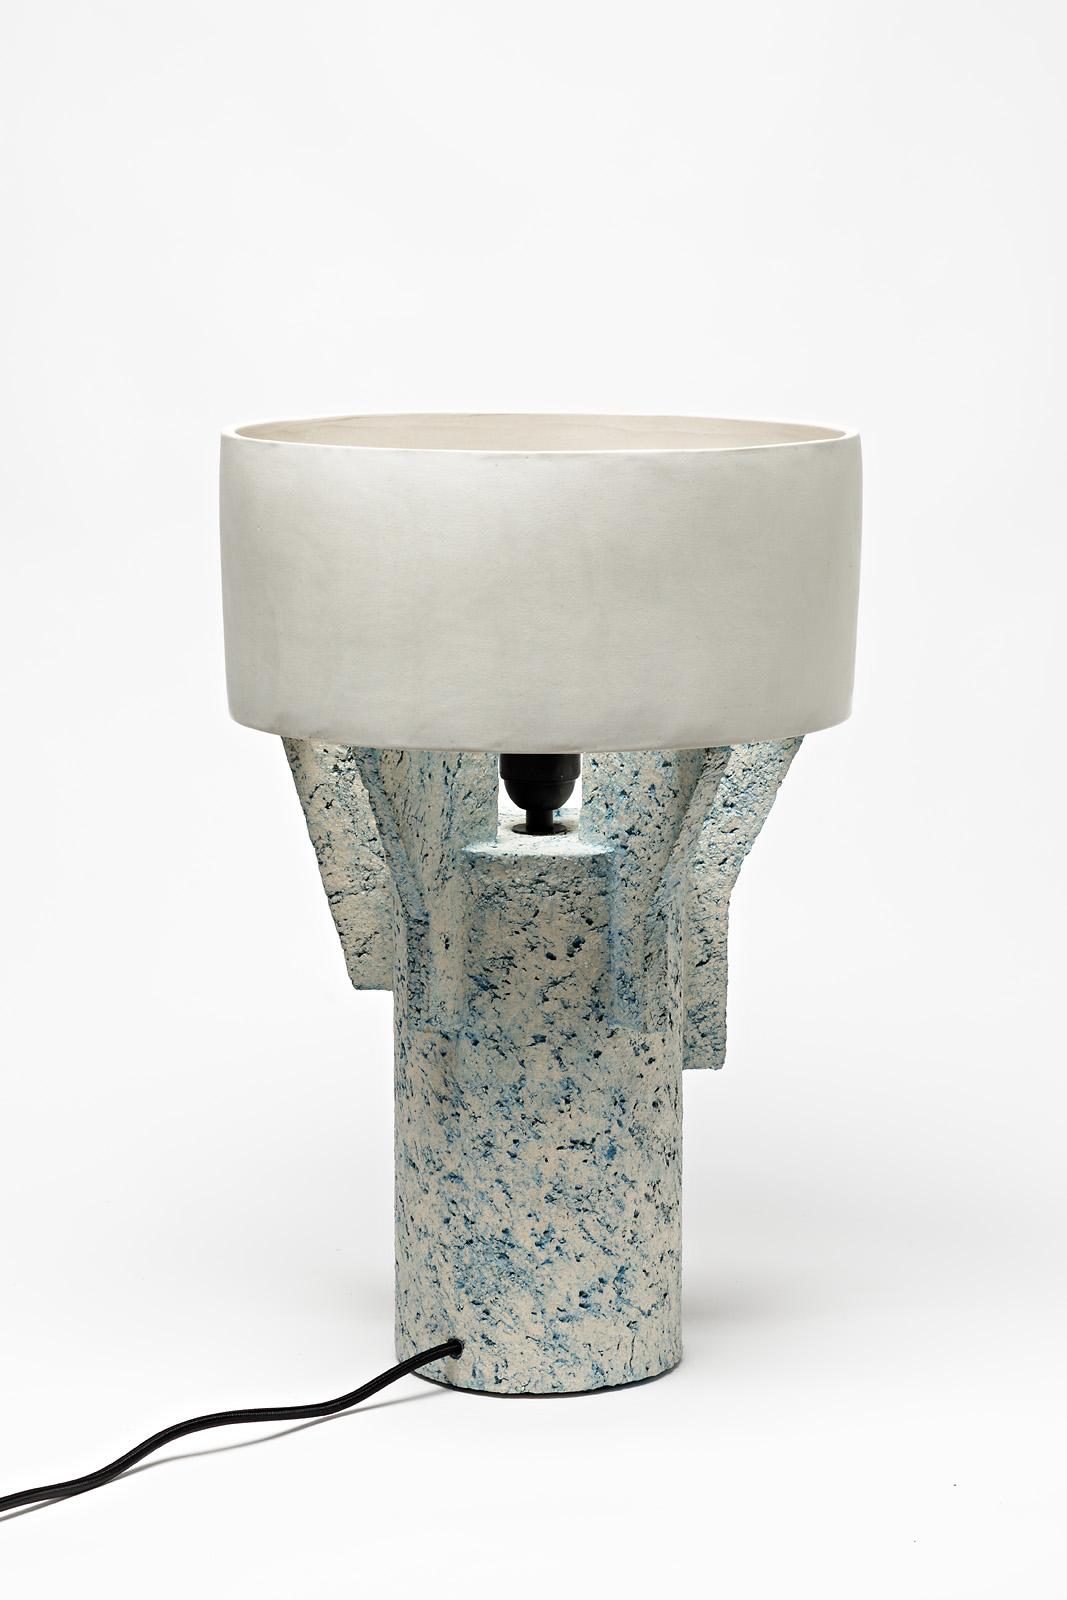 Beaux Arts Ceramic Table Lamp by Denis Castaing with White Glaze Decoration, 2019 For Sale